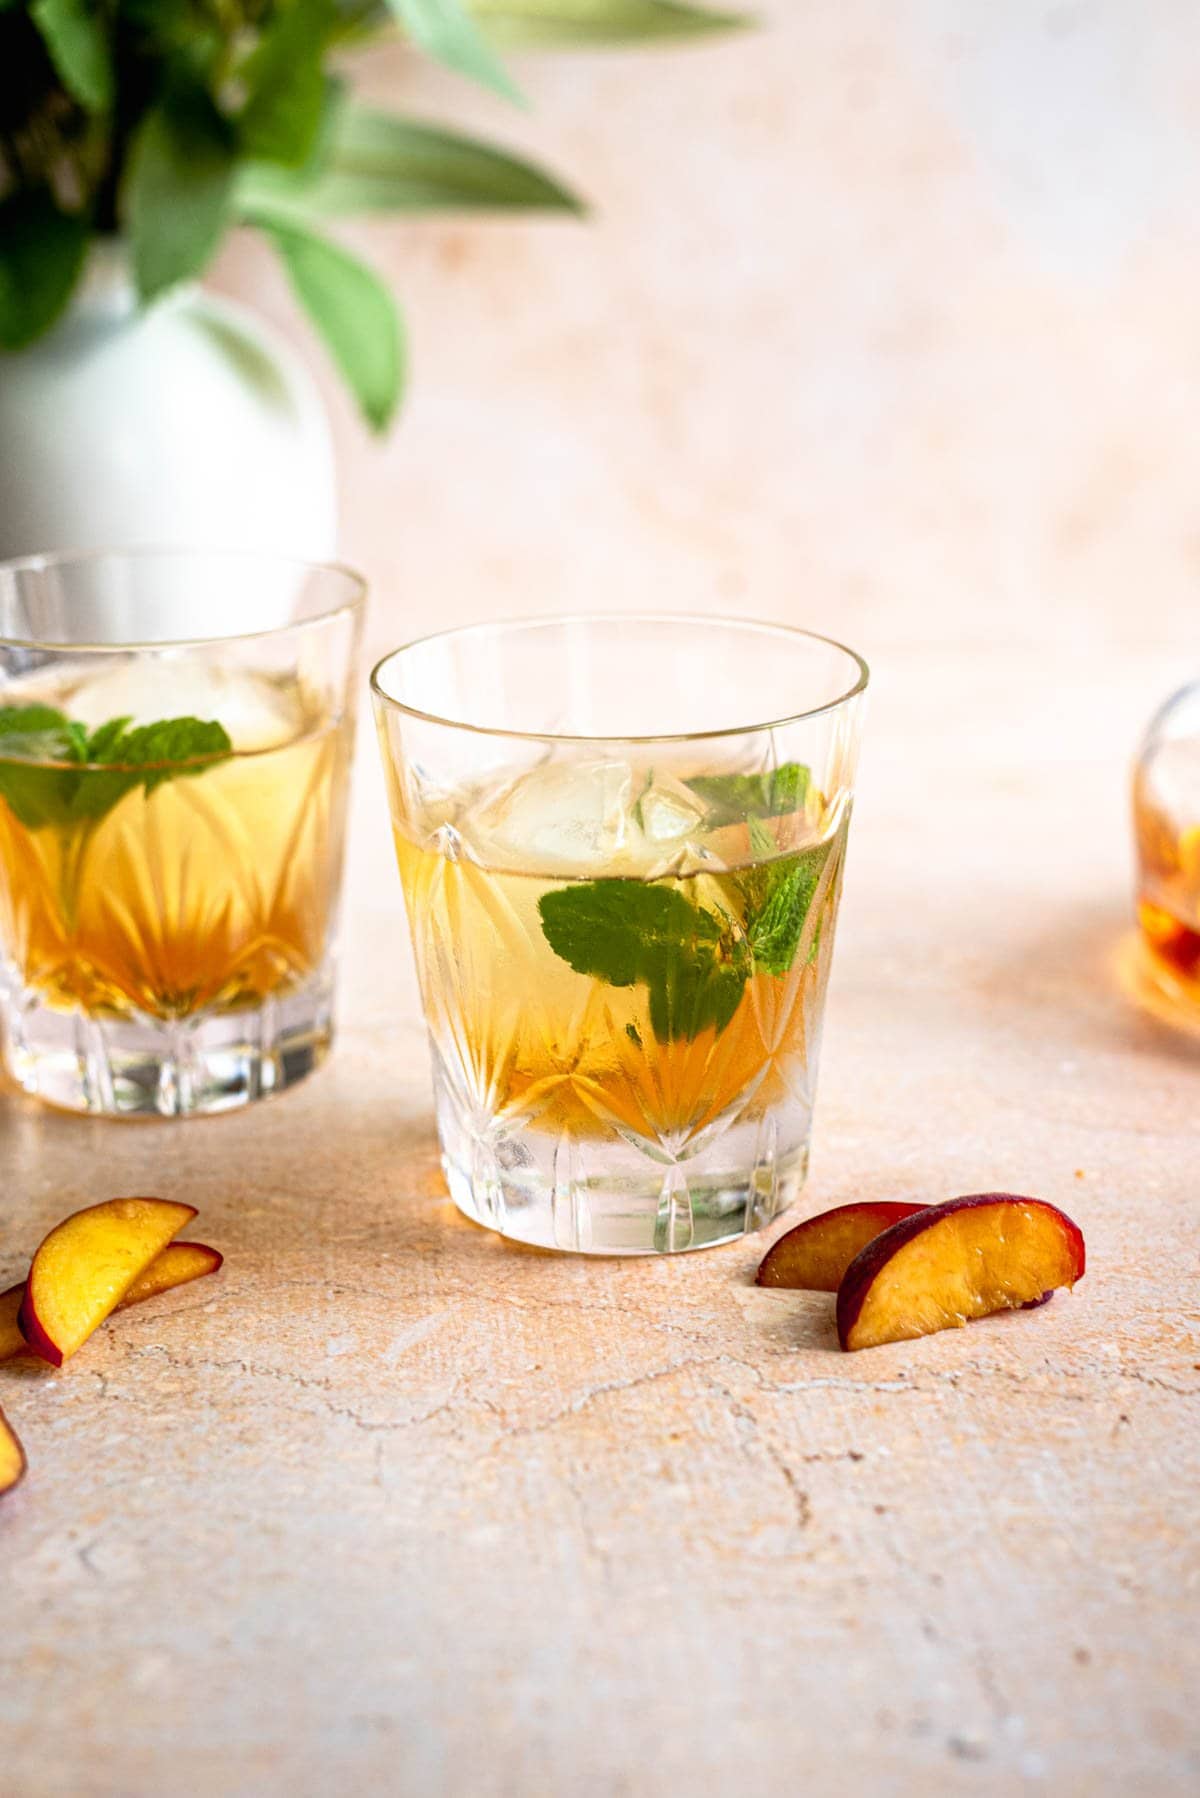 Two glasses of peach old fashioned's on a brown table with peach slices of to the sides.